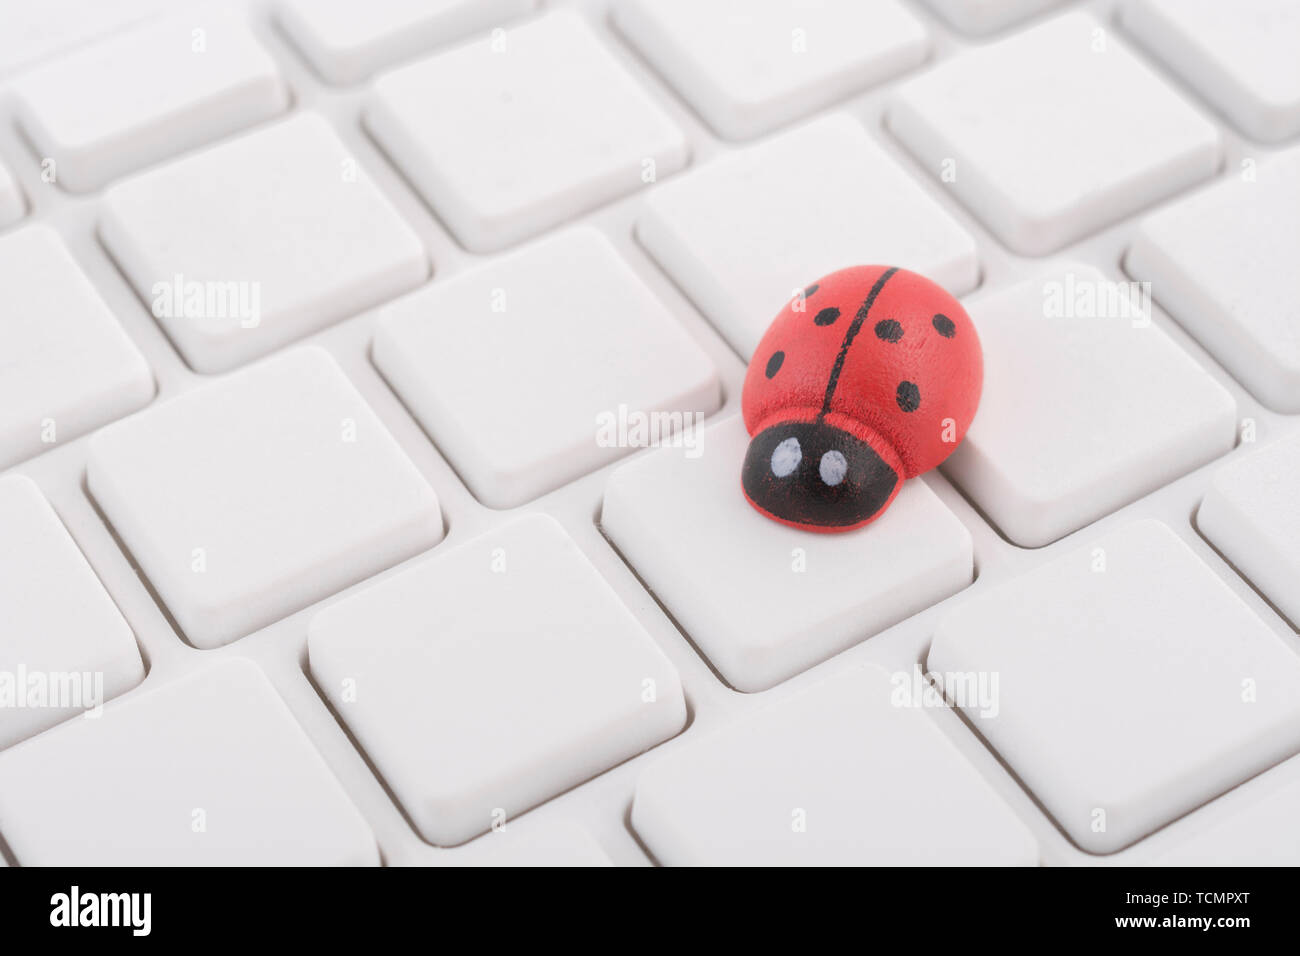 Ladybirds / ladybugs on blank white Qwerty PC keyboard - visual metaphor for concept of computer bug, or viral / system 'infection', computer gremlins Stock Photo